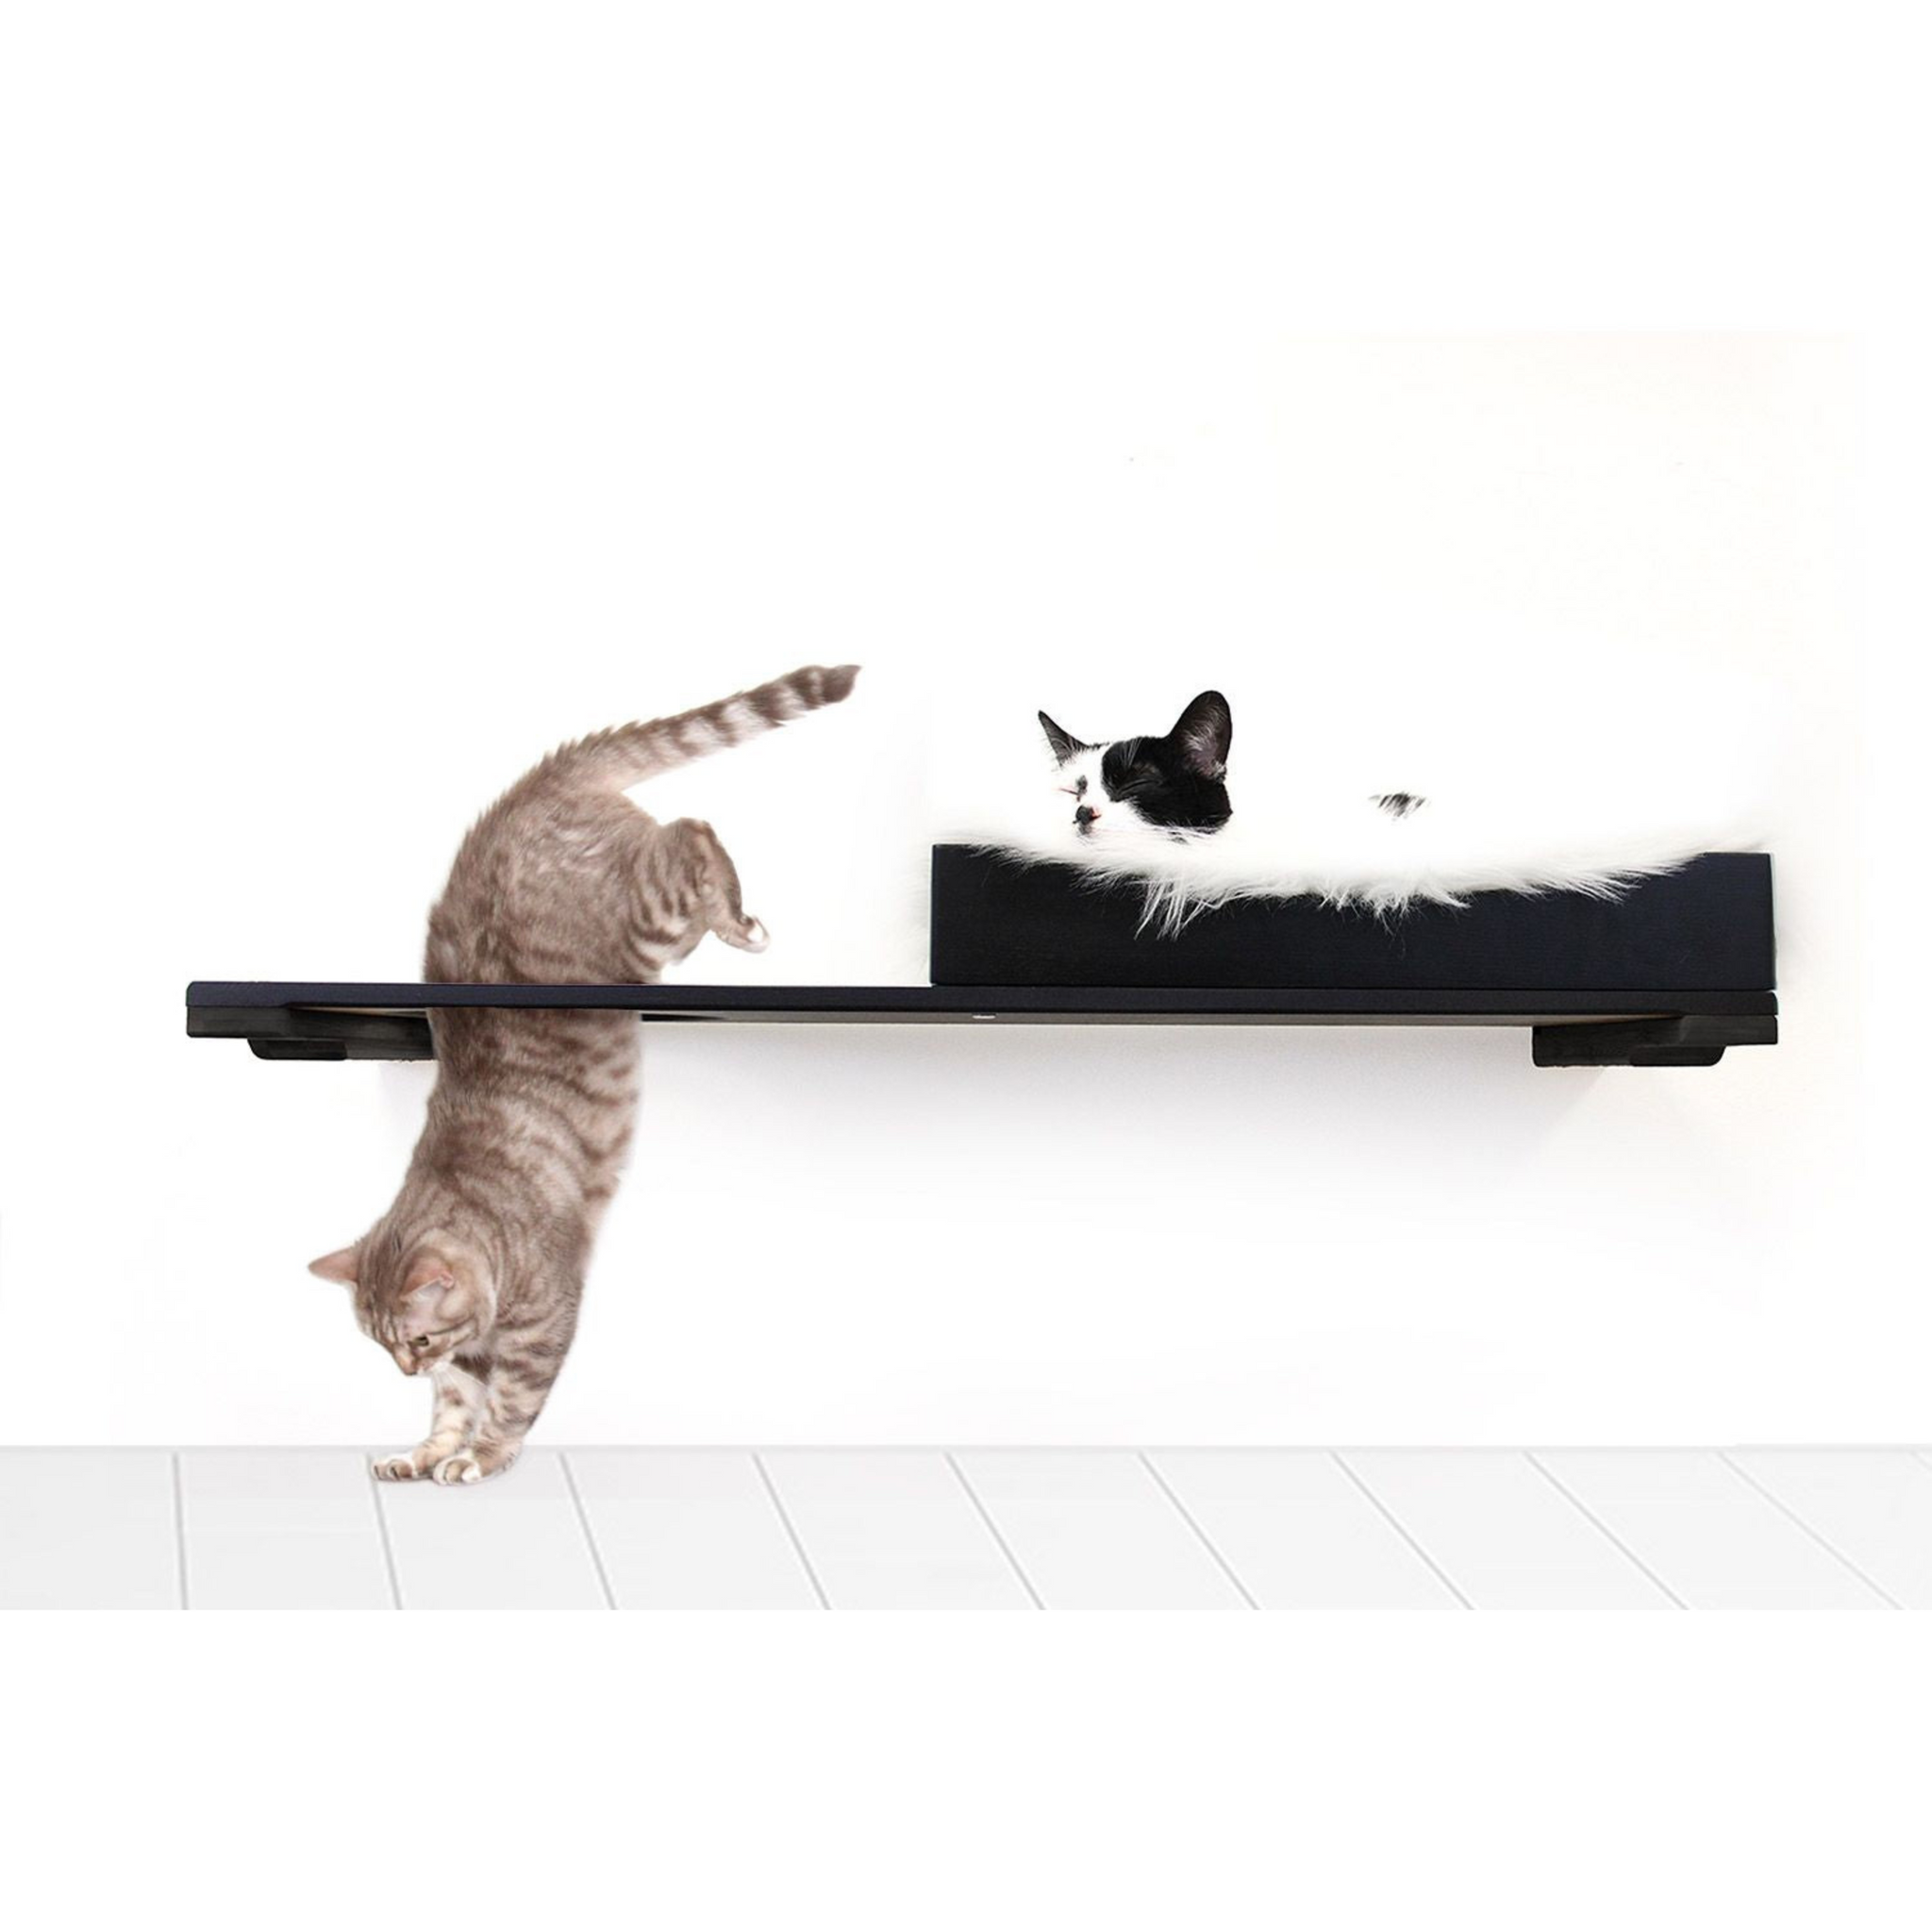 The Nest - A Plush Wall Cat Bed by Catastrophic Creations